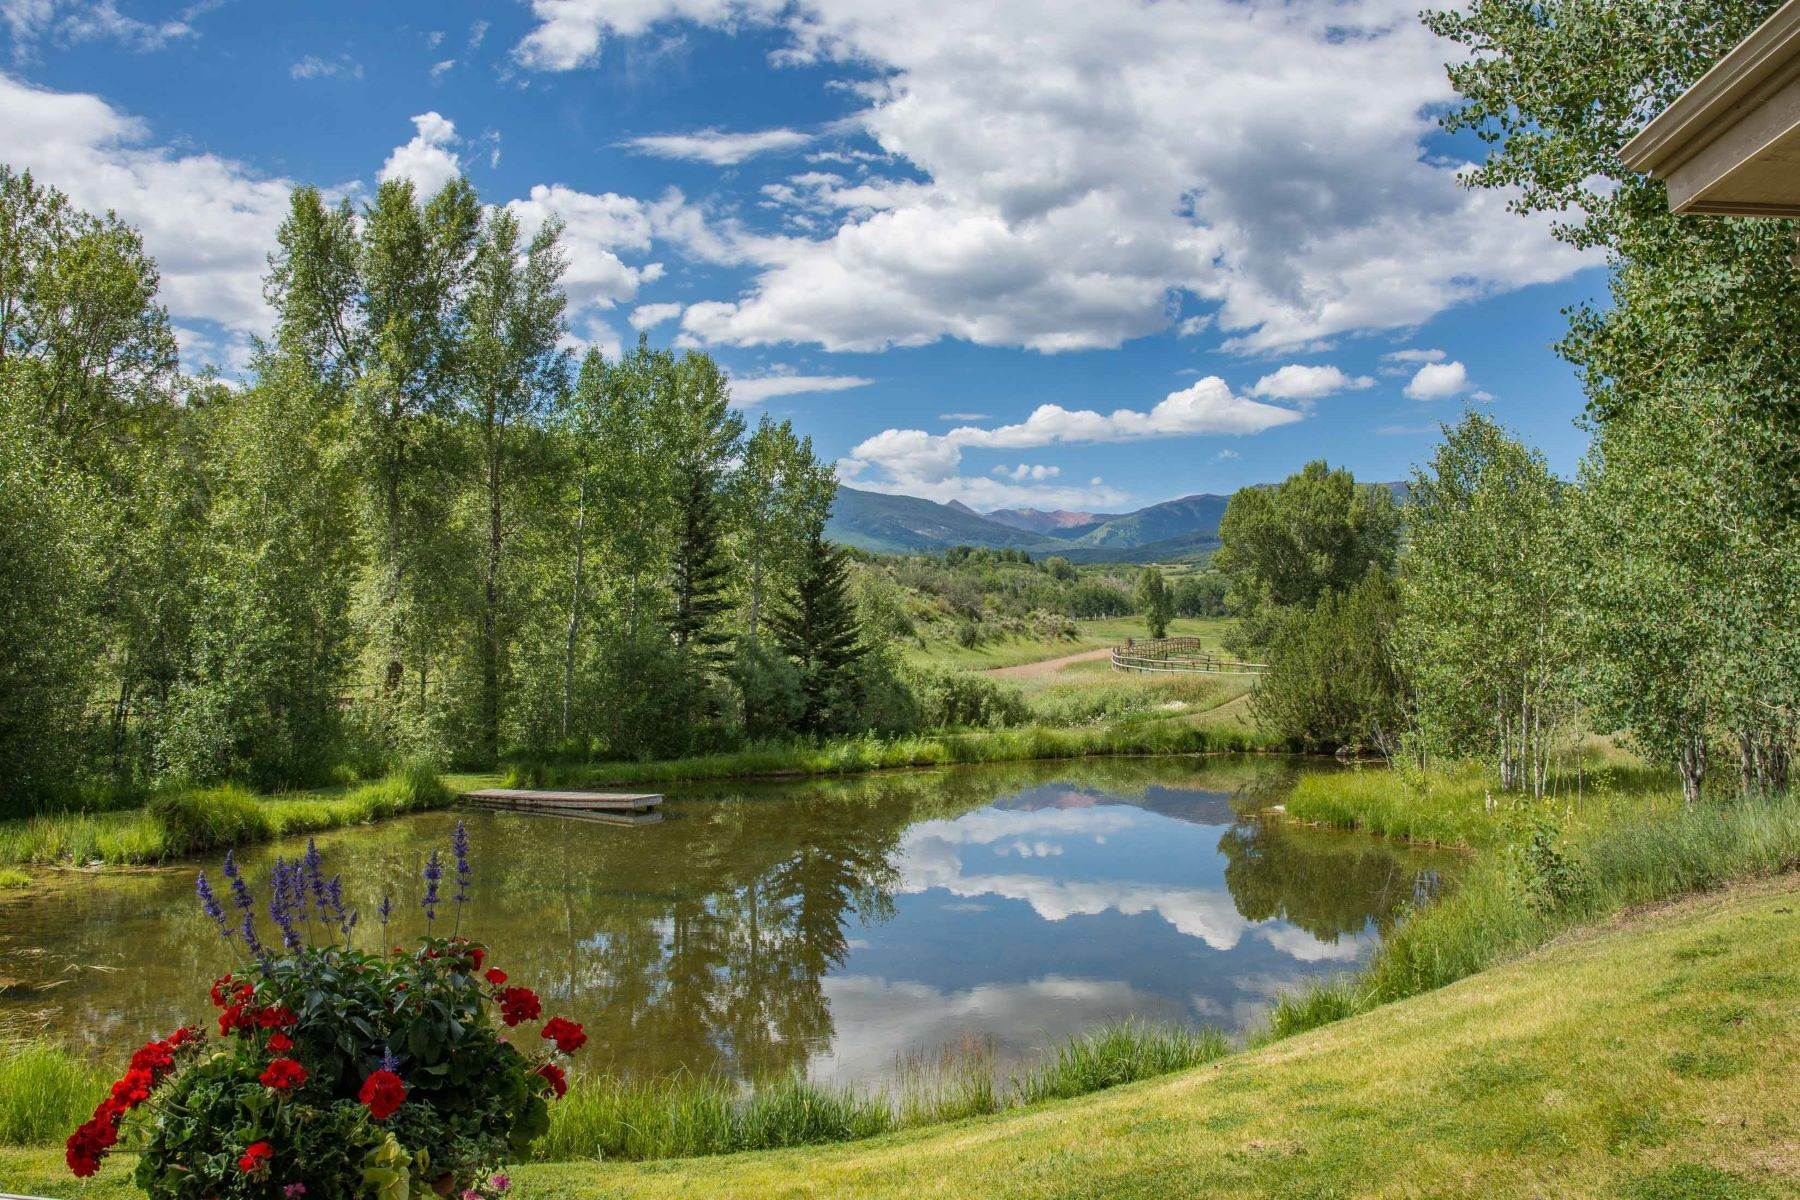 Farm and Ranch Properties için Satış at RARE and UNIQUE opportunity to own the heart of the renowned McCabe Ranch! 1321 Elk Creek & TBD McCabe Ranch Road Old Snowmass, Colorado 81654 Amerika Birleşik Devletleri